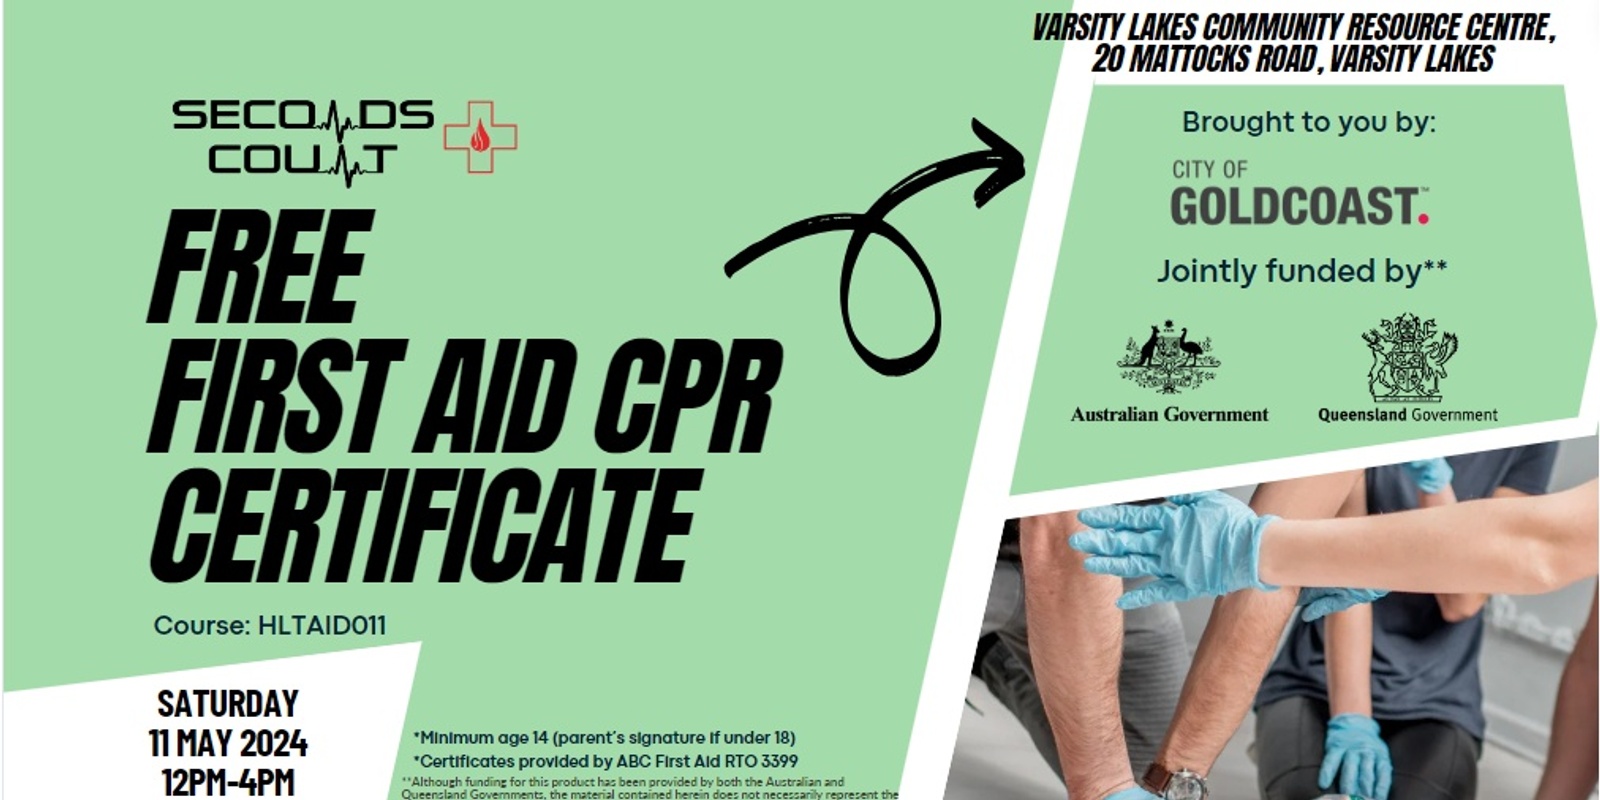 Banner image for FREE FIRST AID CPR CERTIFICATE by Seconds Count 